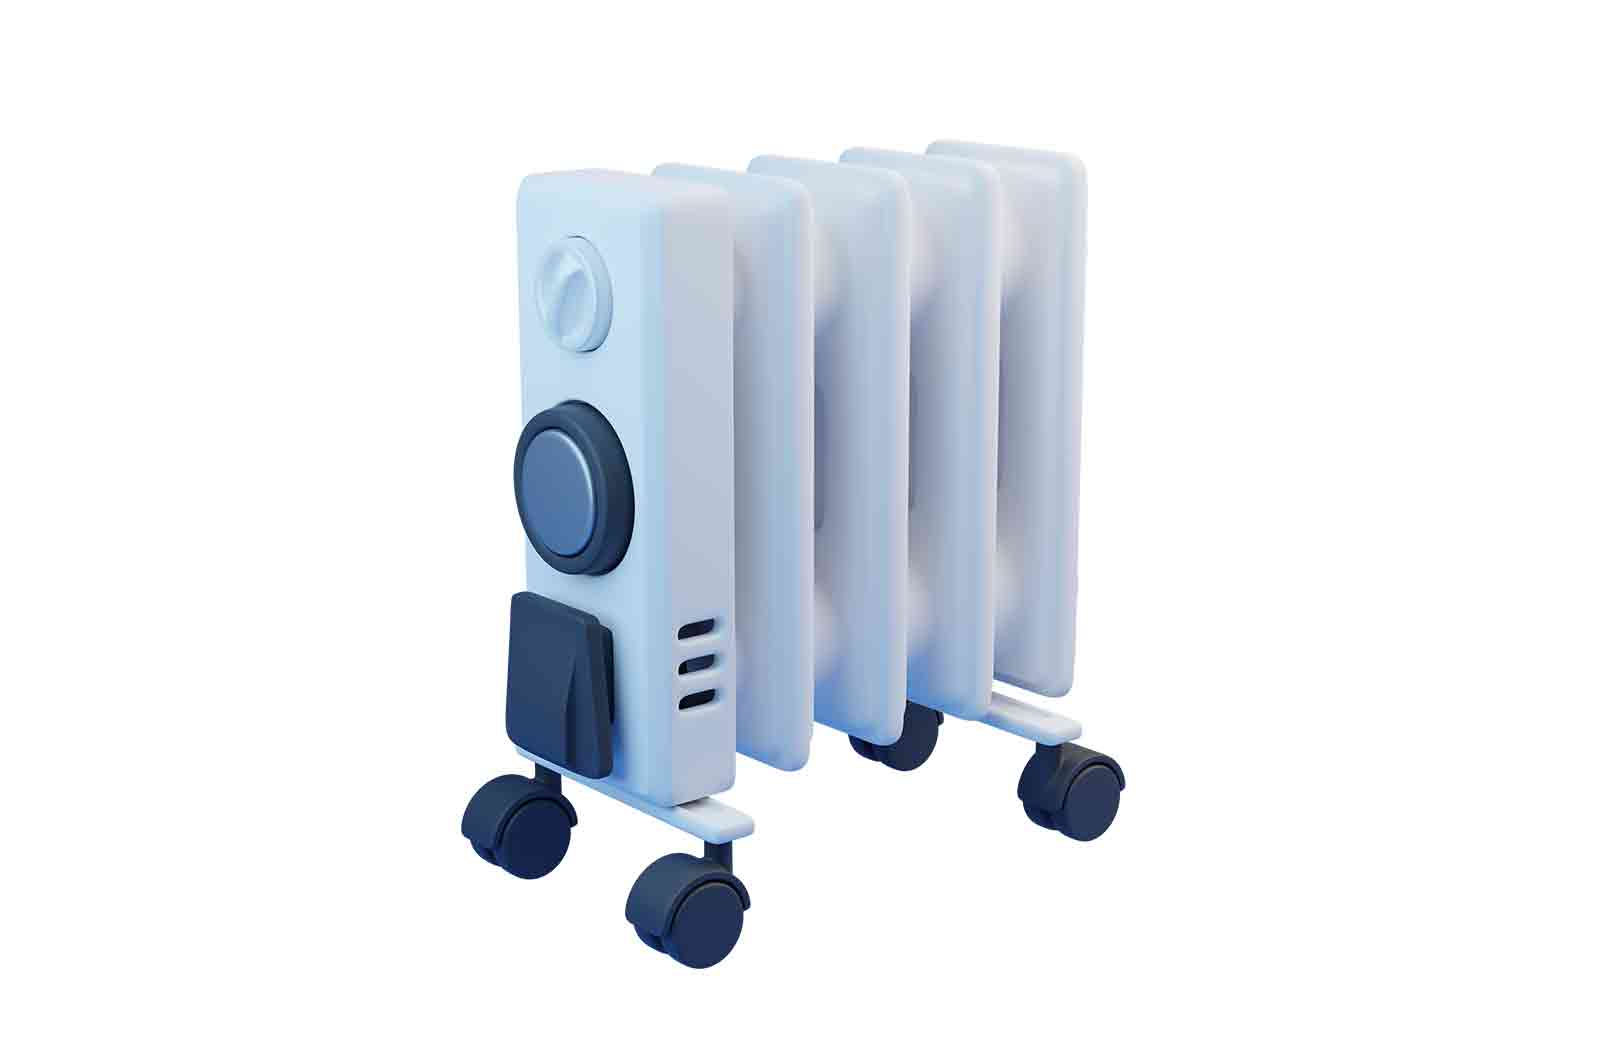 Electric oil filled heater 3d rendered illustration. Domestic electric heater with plug and electric cord. White electric radiator